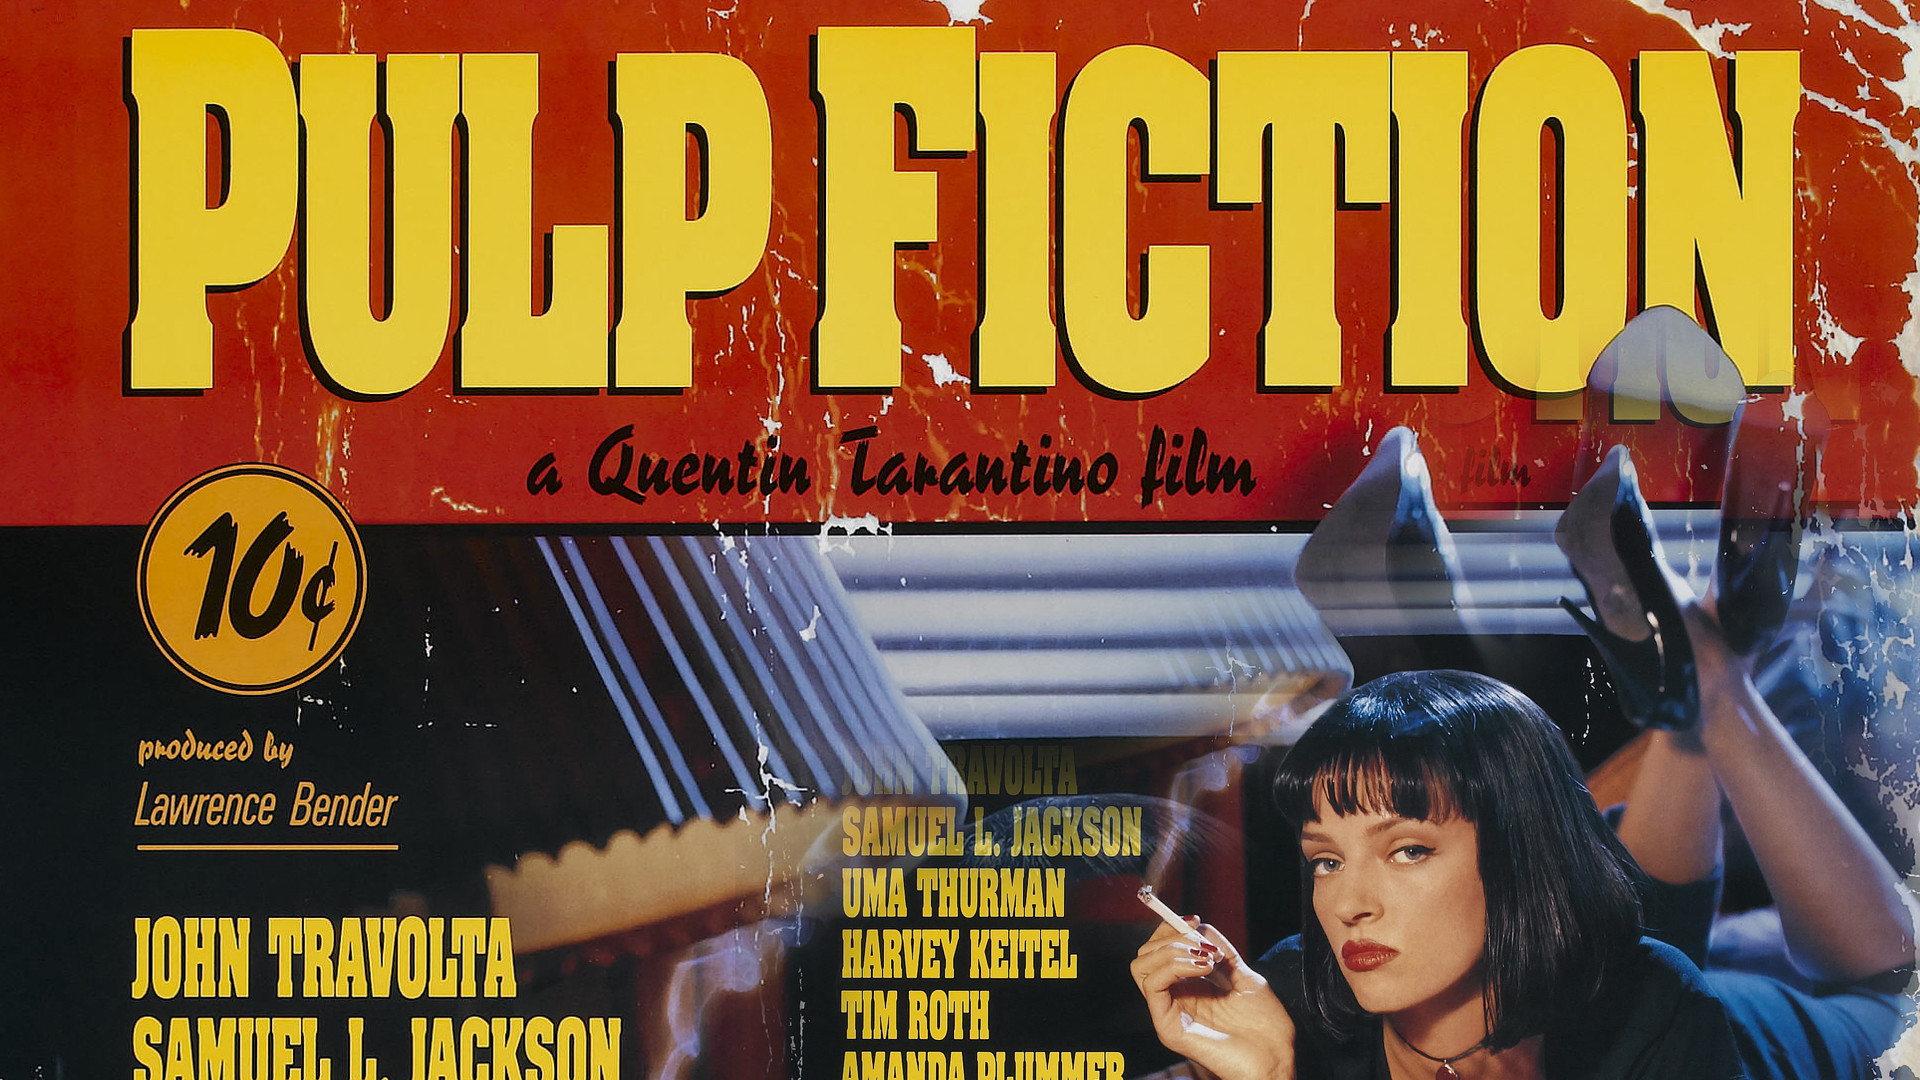 1920x1080 ... Pulp Fiction Xbox 360 Dashboard Wallpaper by Udder-Juice